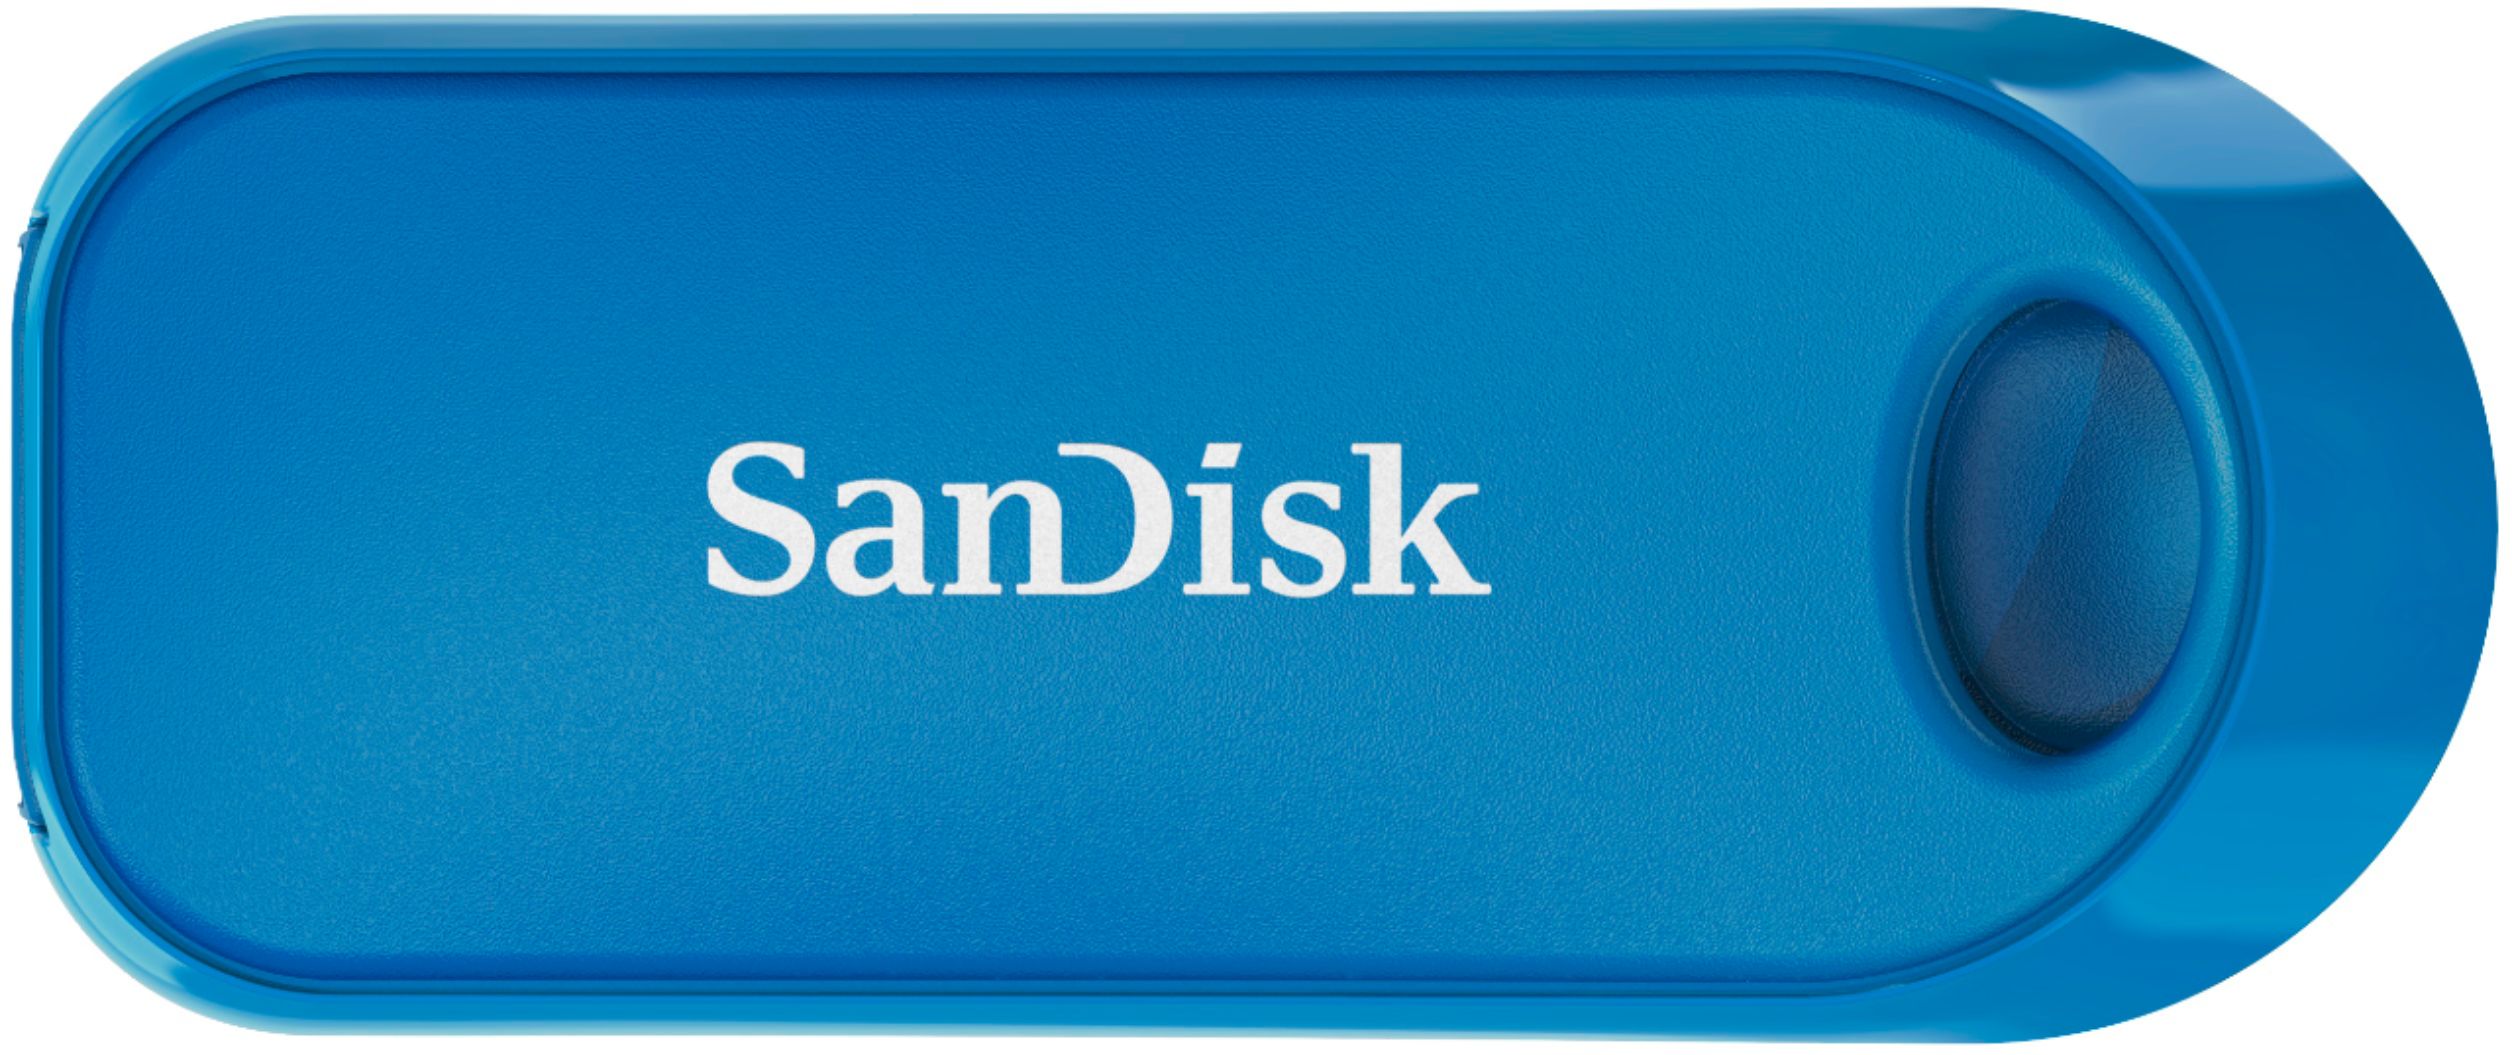 Best Buy: SanDisk 64GB USB 2.0 Flash Drive with Encryption Blue